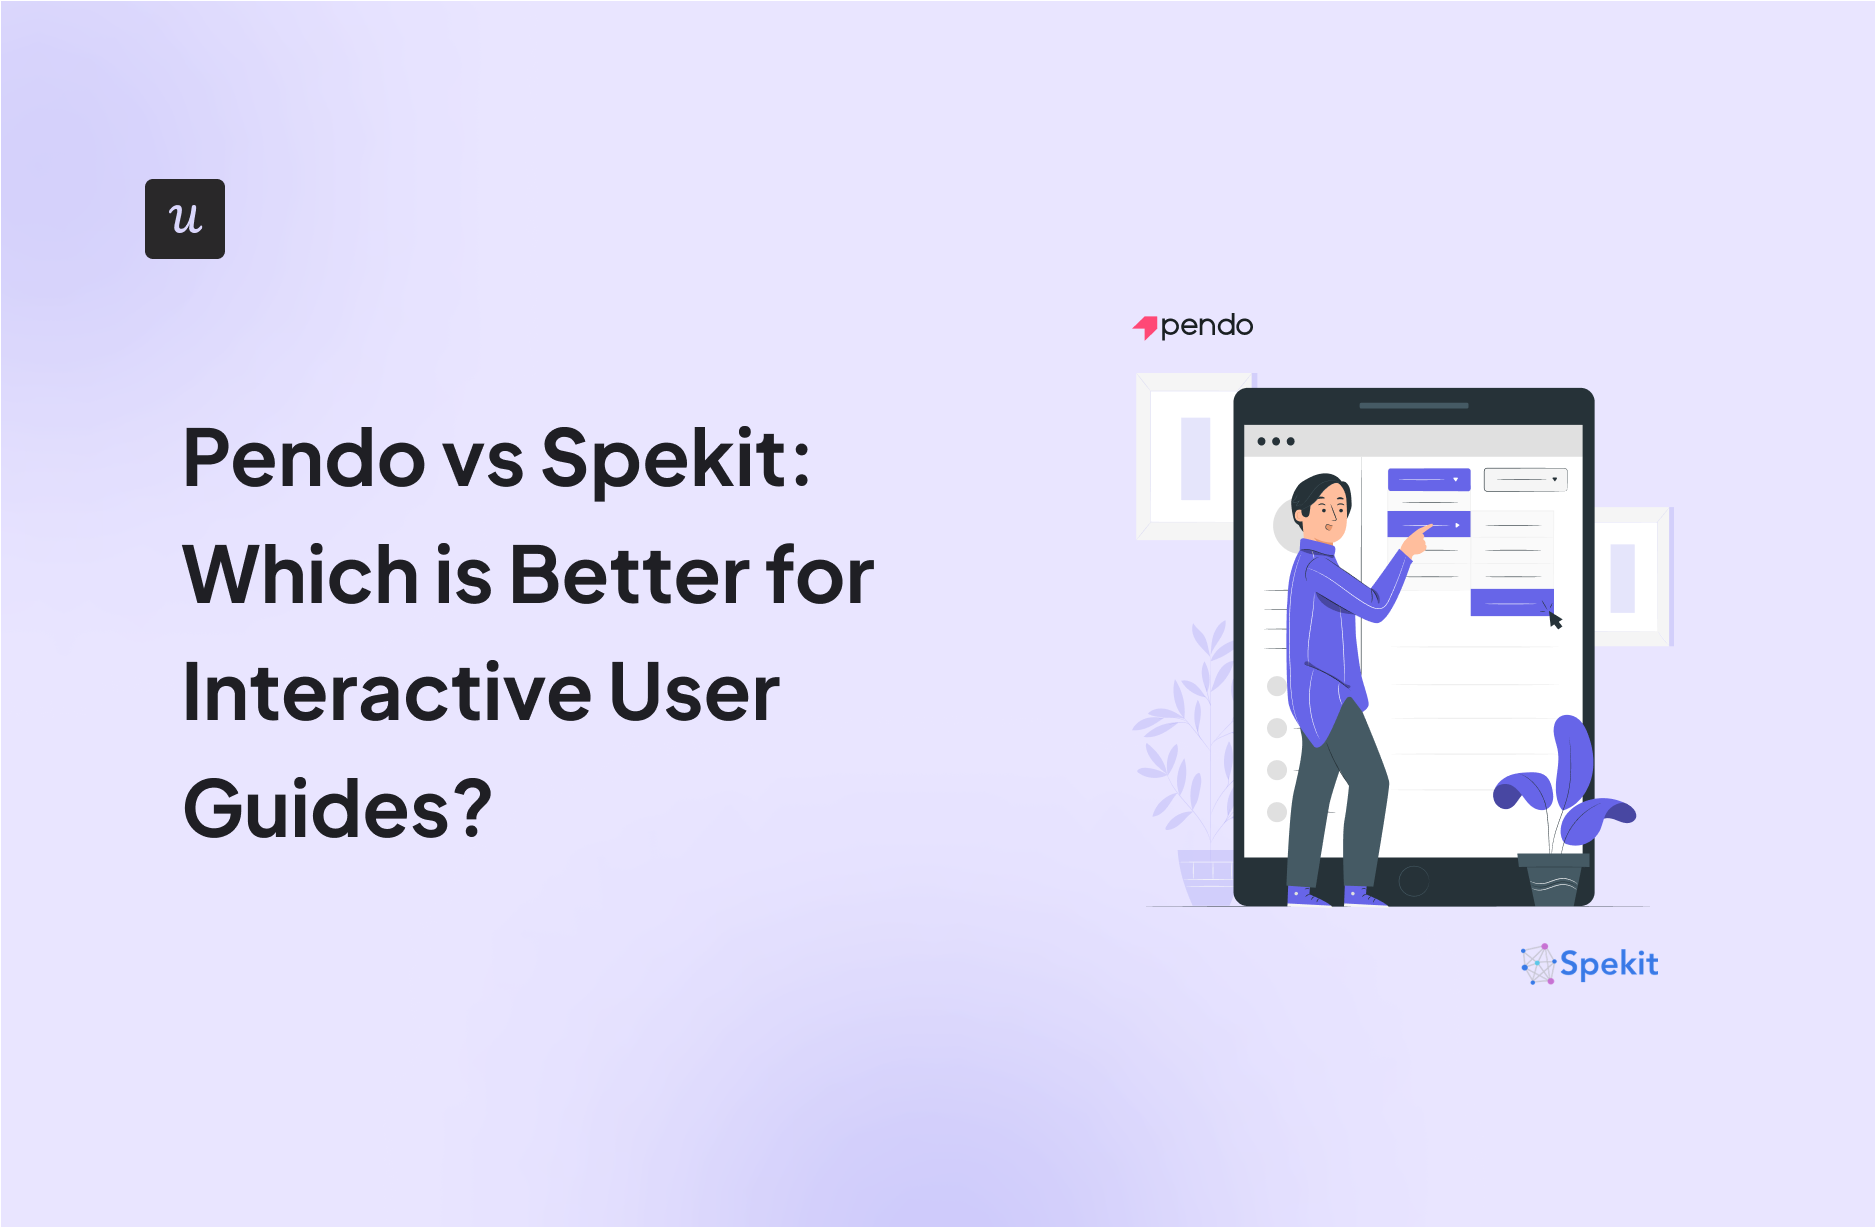 Pendo vs Spekit: Which is Better for Interactive User Guides?